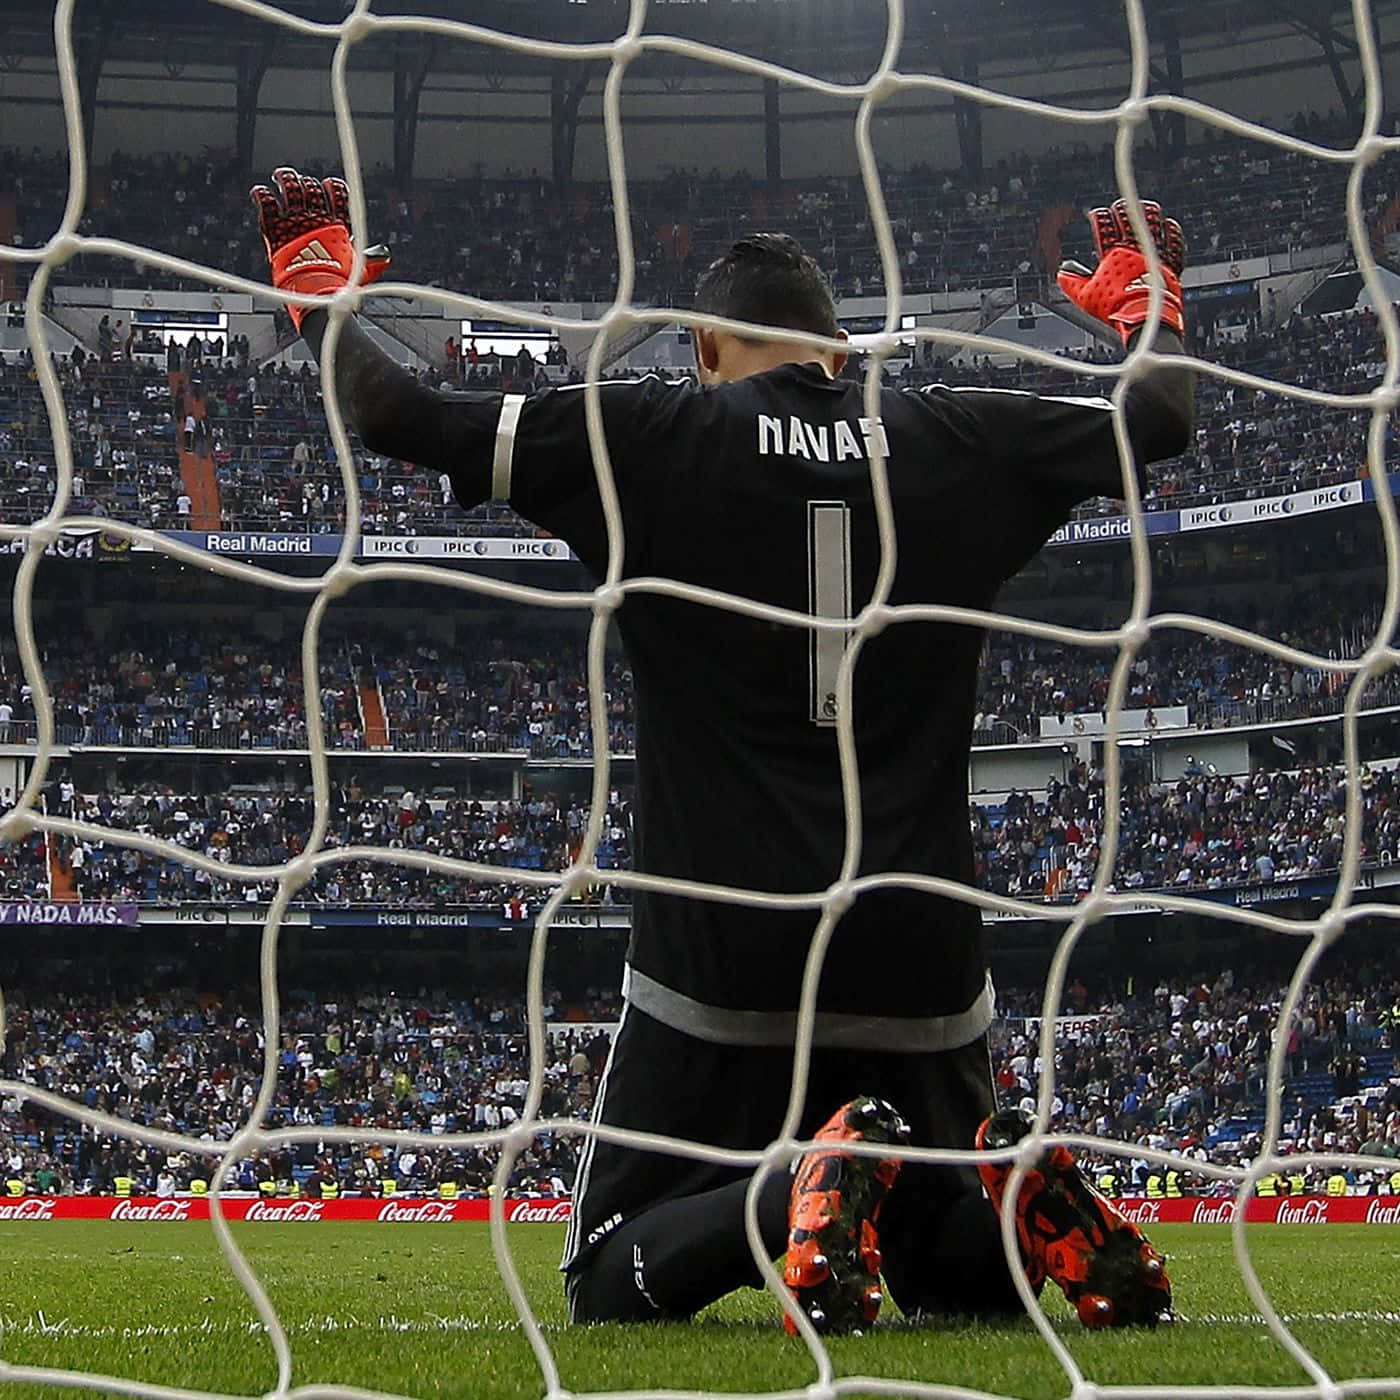 Keylor Navas in action during a football match Wallpaper